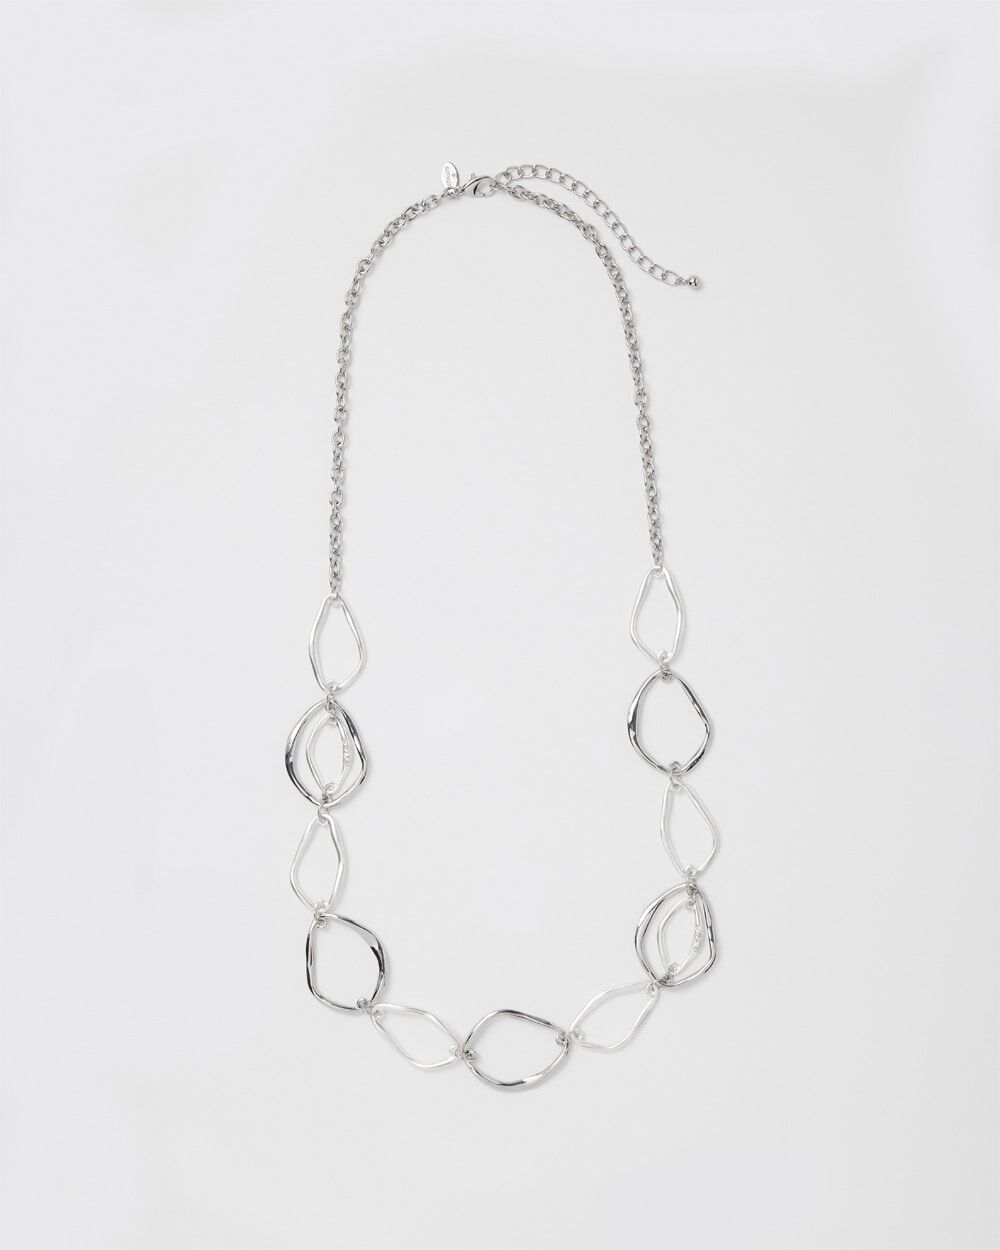 Chico's Off The Rack Women's Tonal Tone Singlestrand Necklace in Silver   Chico's Outlet, Clearance Women's Clothing - Silver - Women - Size: One Size